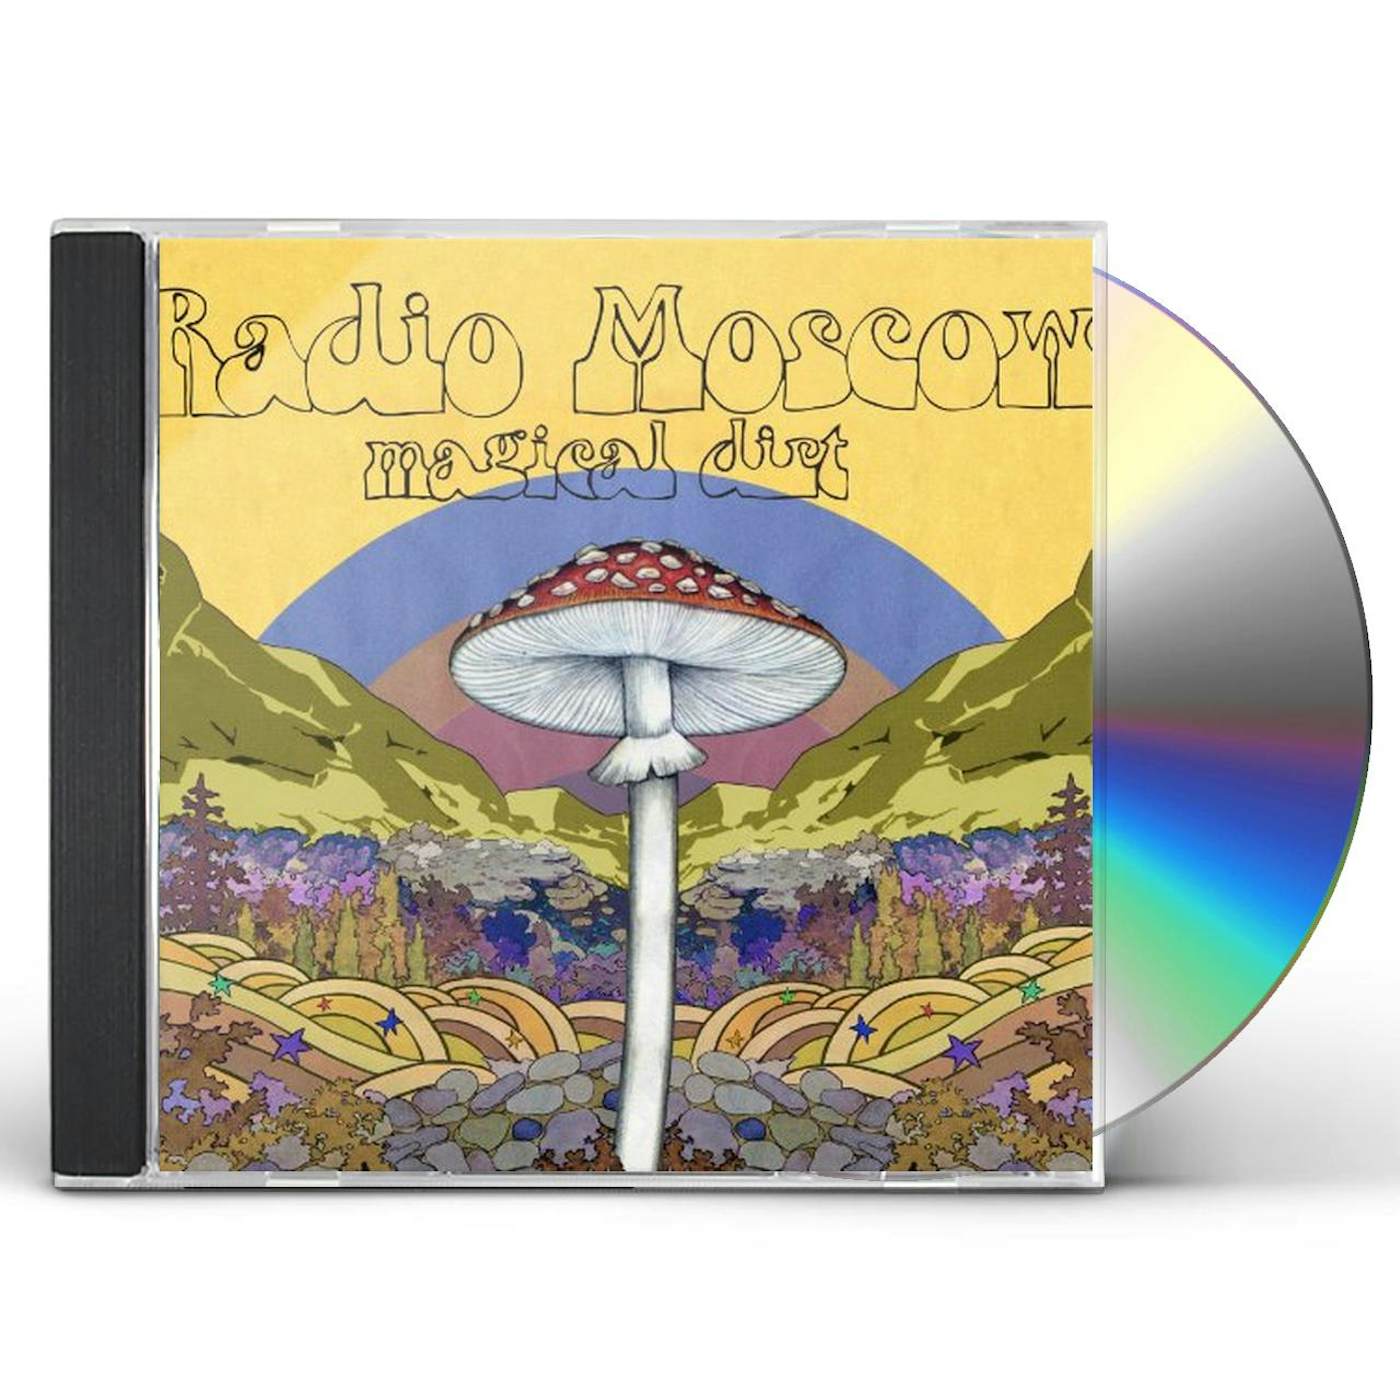 Radio Moscow MAGICAL DIRT CD